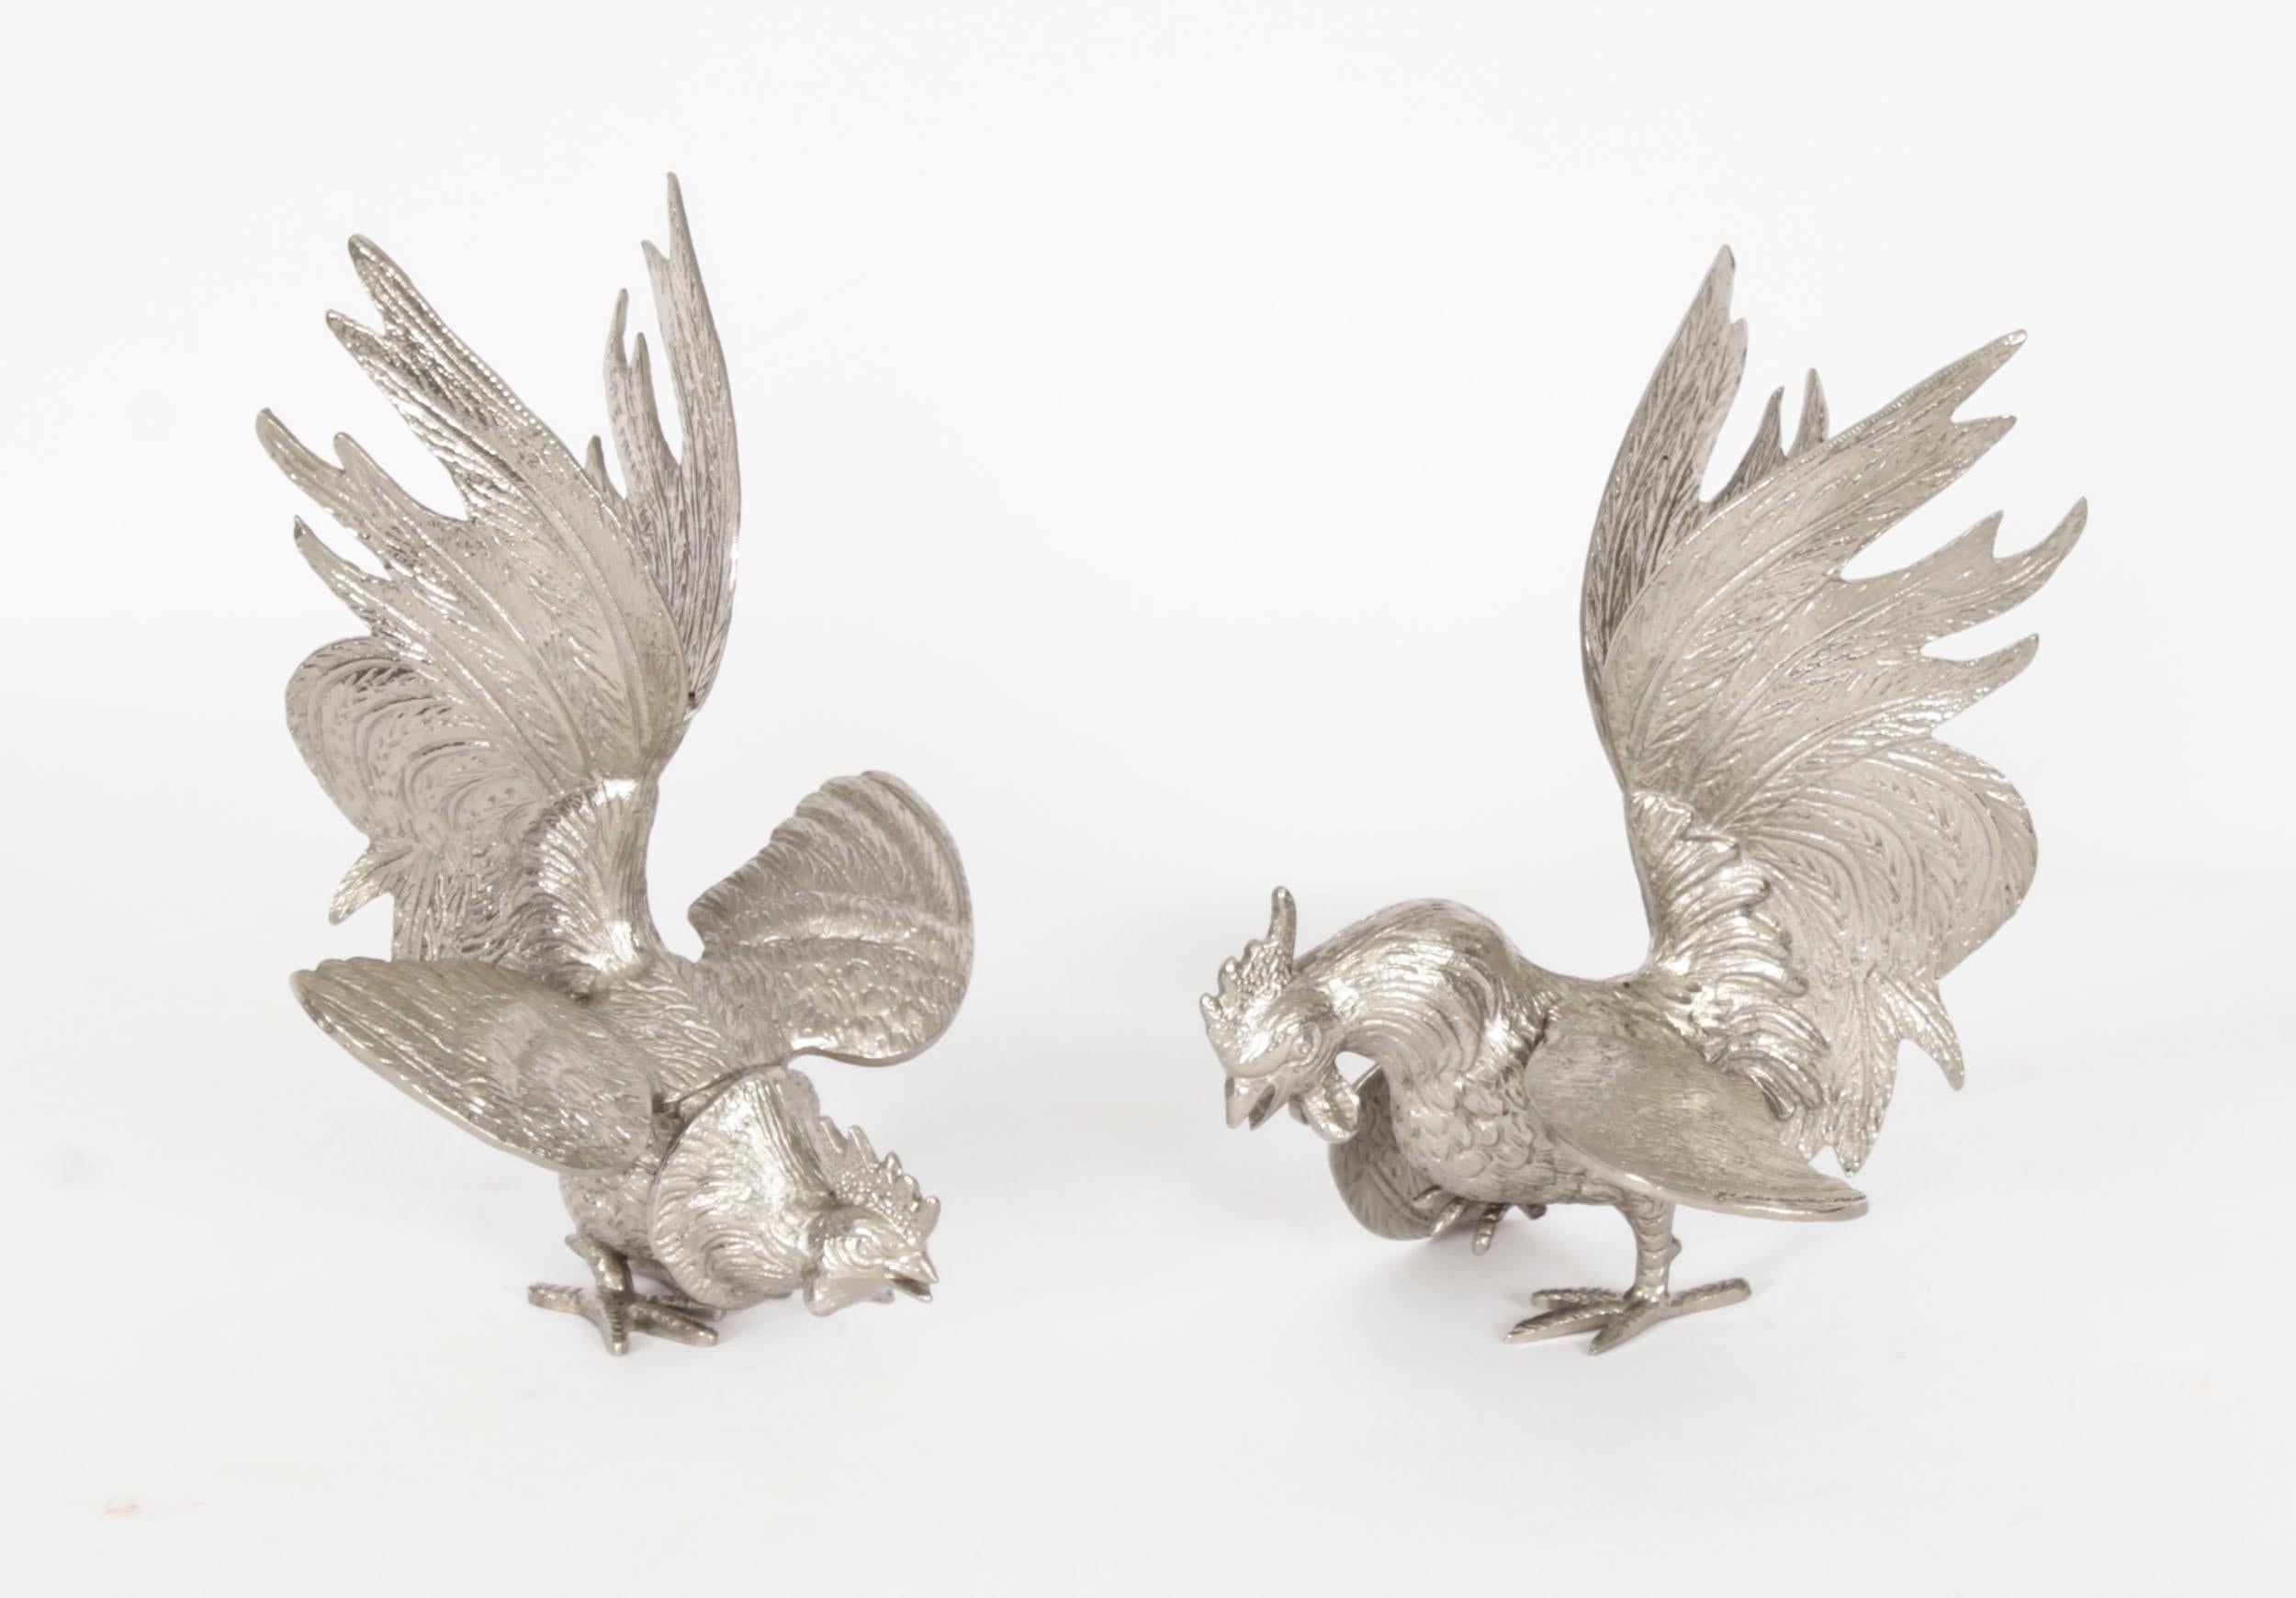 This is a very attractive antique pair of Italian silver plated fighting cockerels, circa 1920 in date.

These beautifully sculpted and hand-chased fine textured cockerels are in realistic aggressive and dynamic fighting poses with flowing plumage